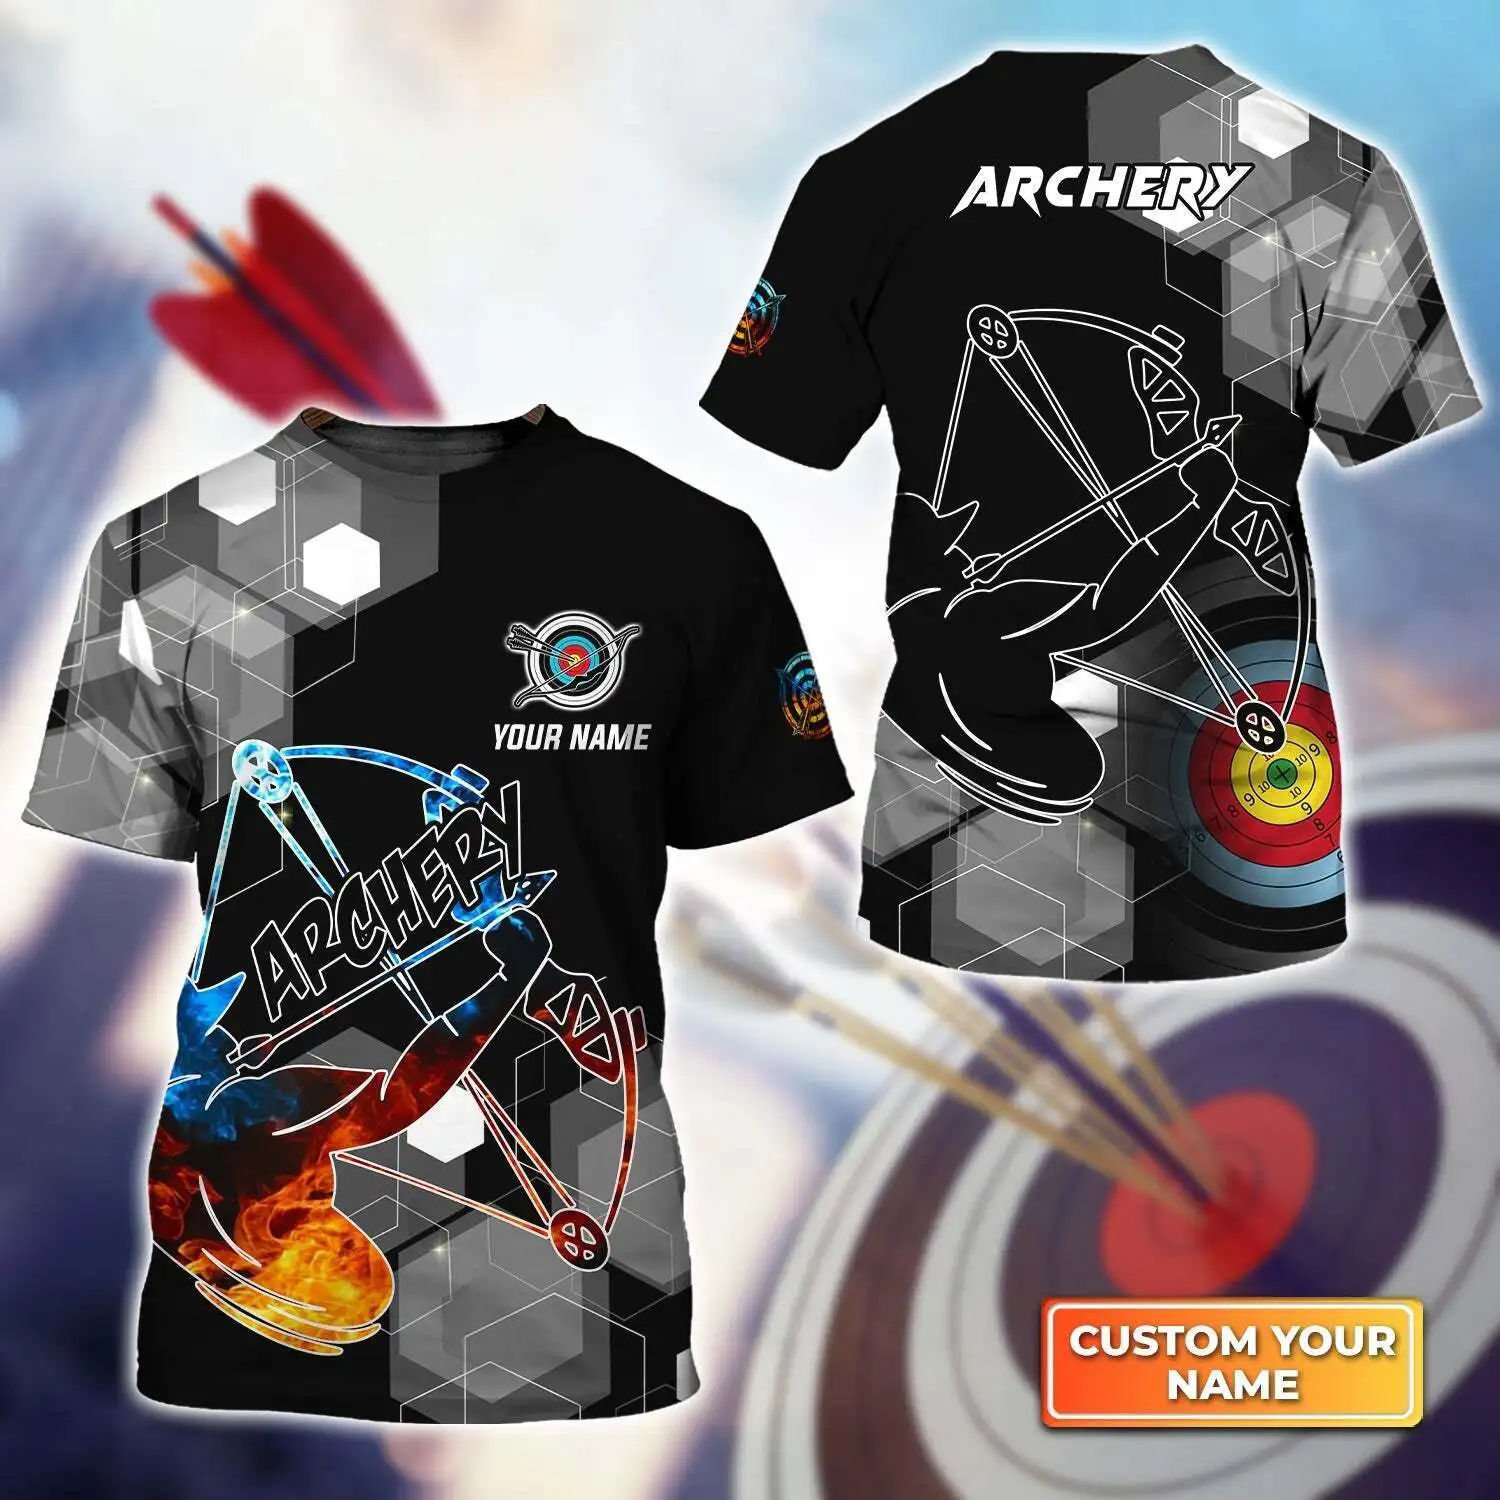 

3D Archery T-shirt Fashion Summer Archery Team Player Personalized Name 3D Printed Men's Tee Shirt Unisex Casual Oversized Top